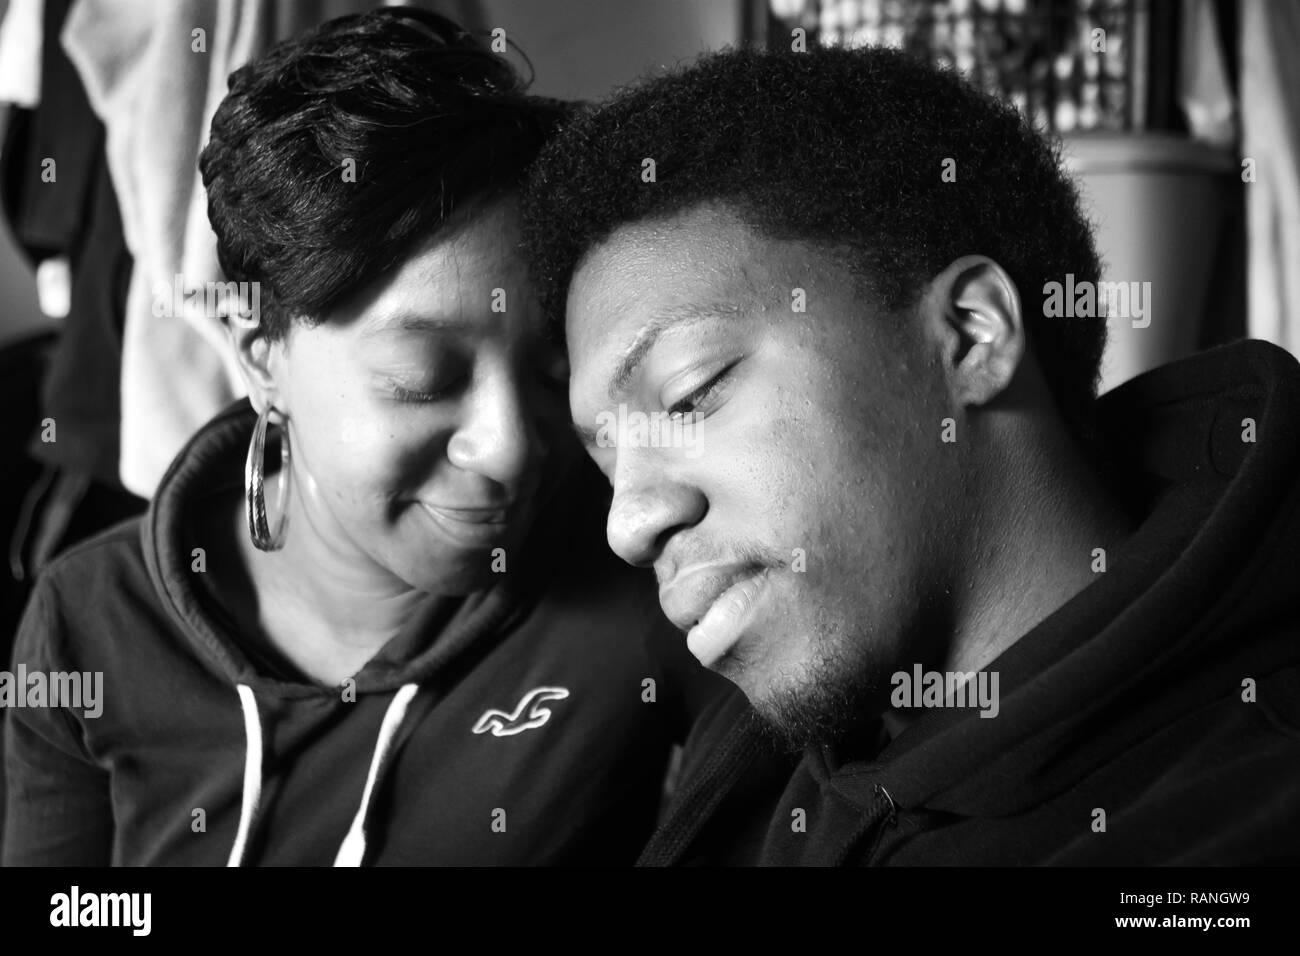 Black mother and son at home having a close moment on the couch Stock Photo